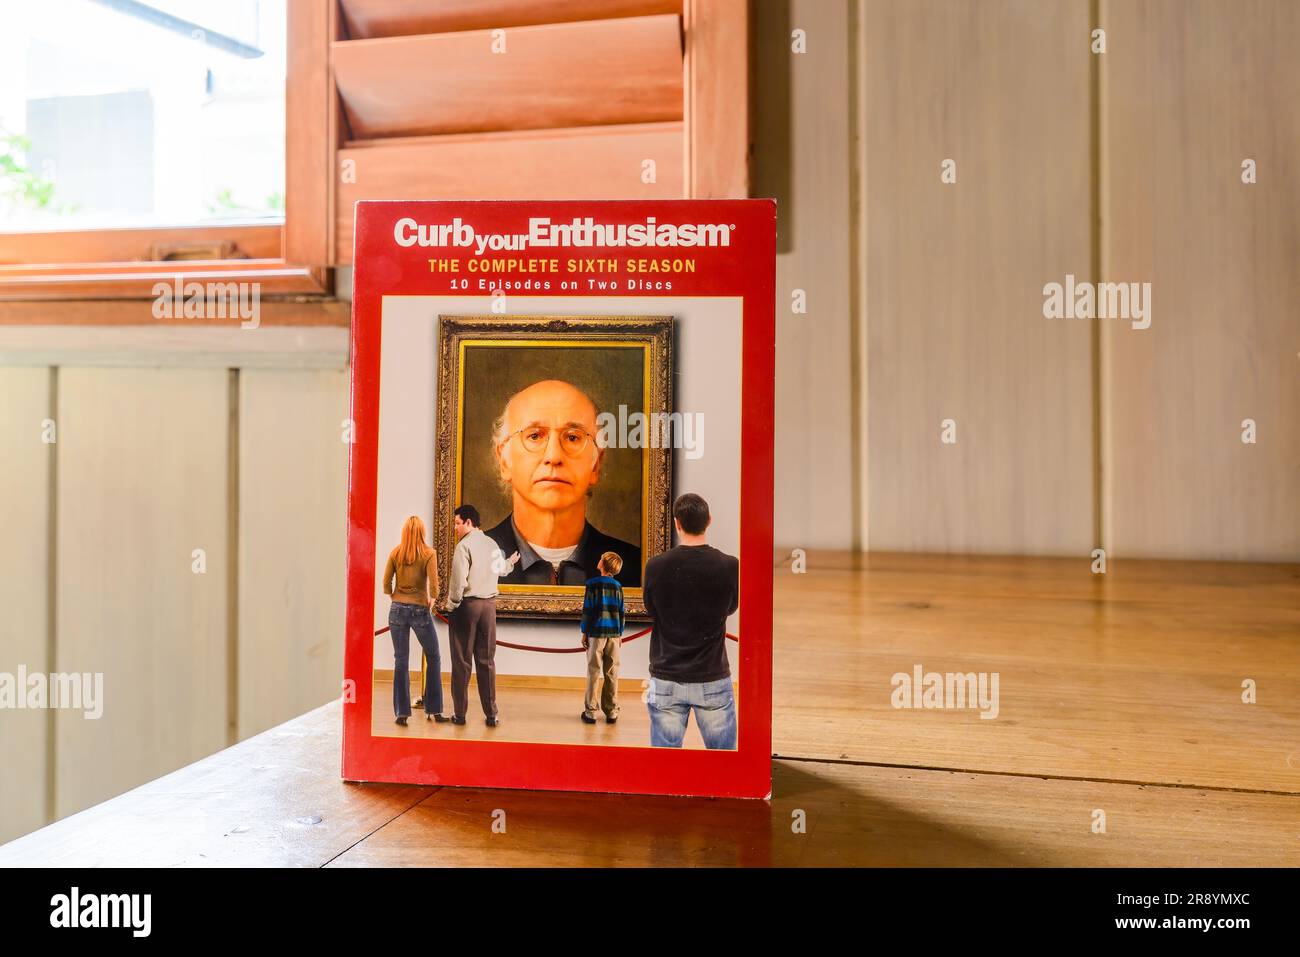 NEW ORLEANS, LA, USA - JUNE 16, 2023: Front cover of the 2 disc DVD for the Complete Sixth Season of 'Curb Your Enthusiasm' Stock Photo